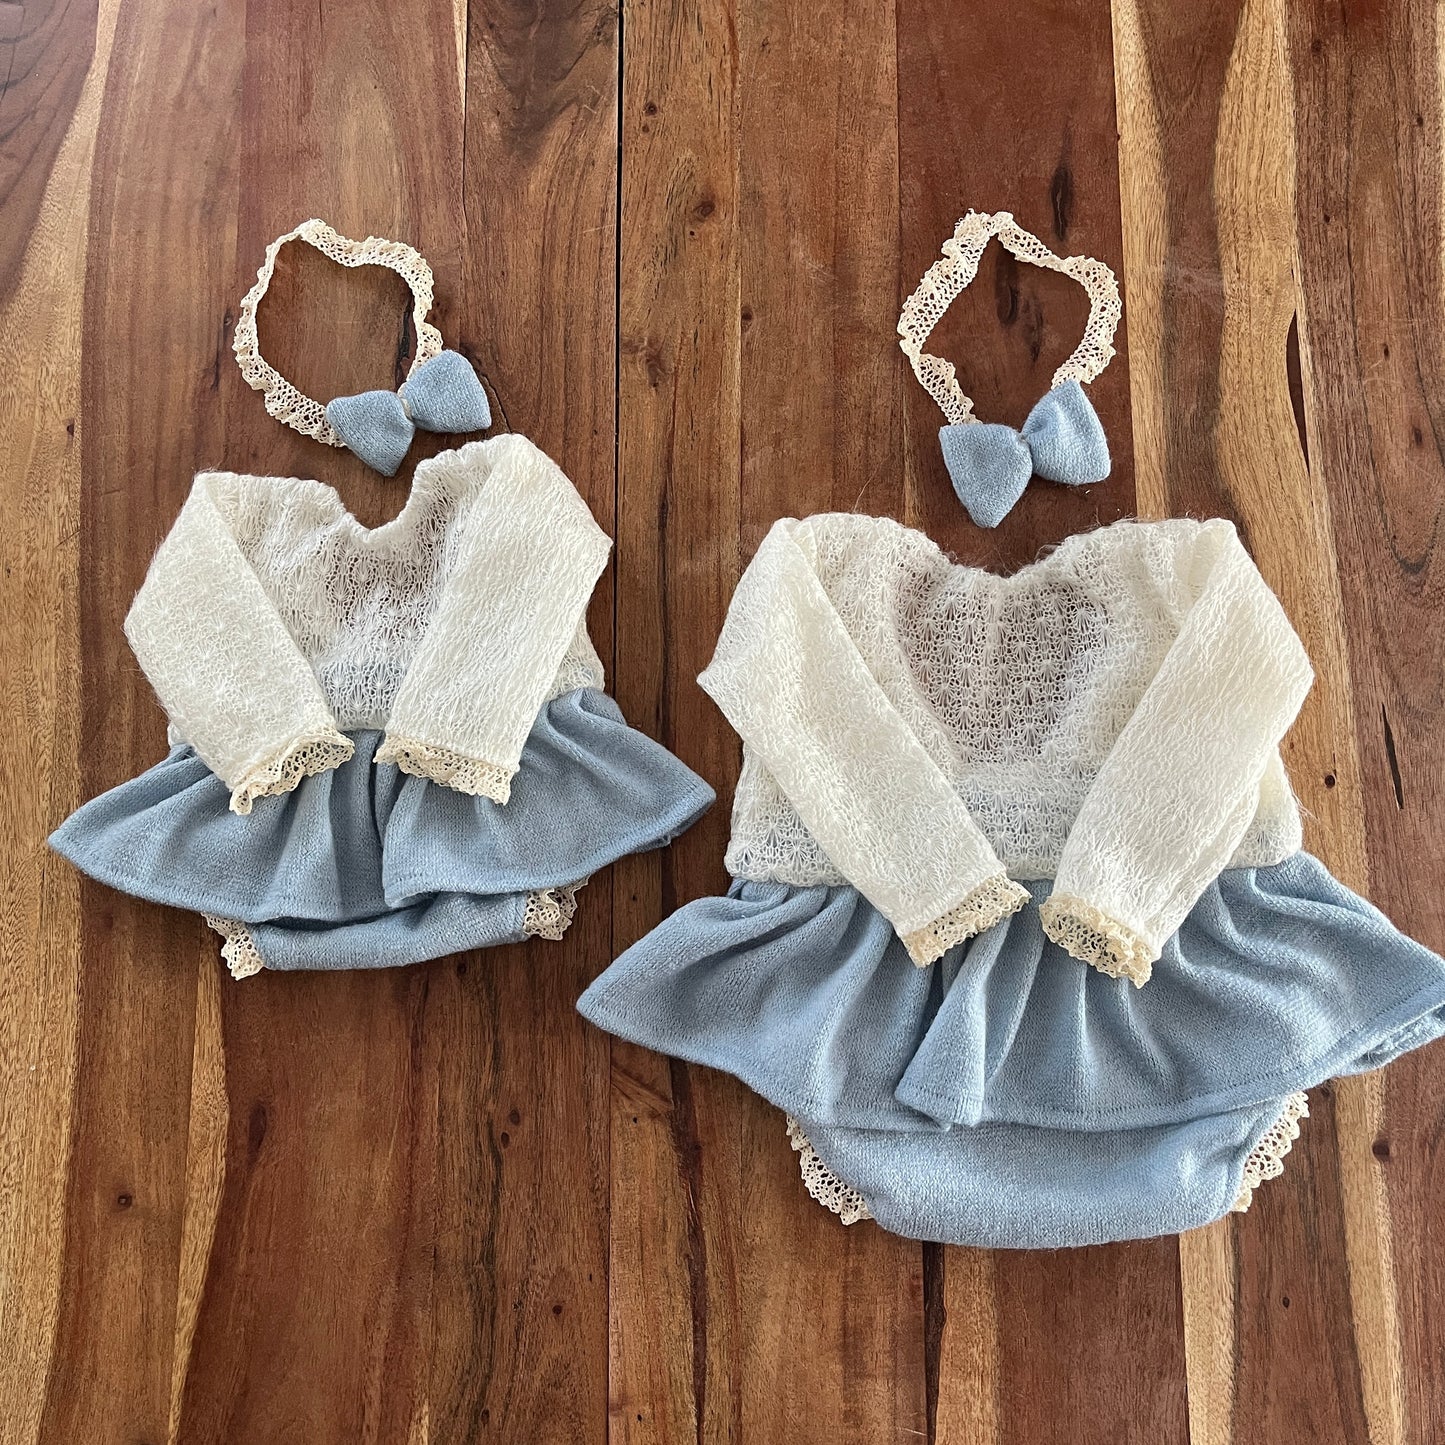 Martha boho Newborn or sitter Photography Prop Outfit For Girl